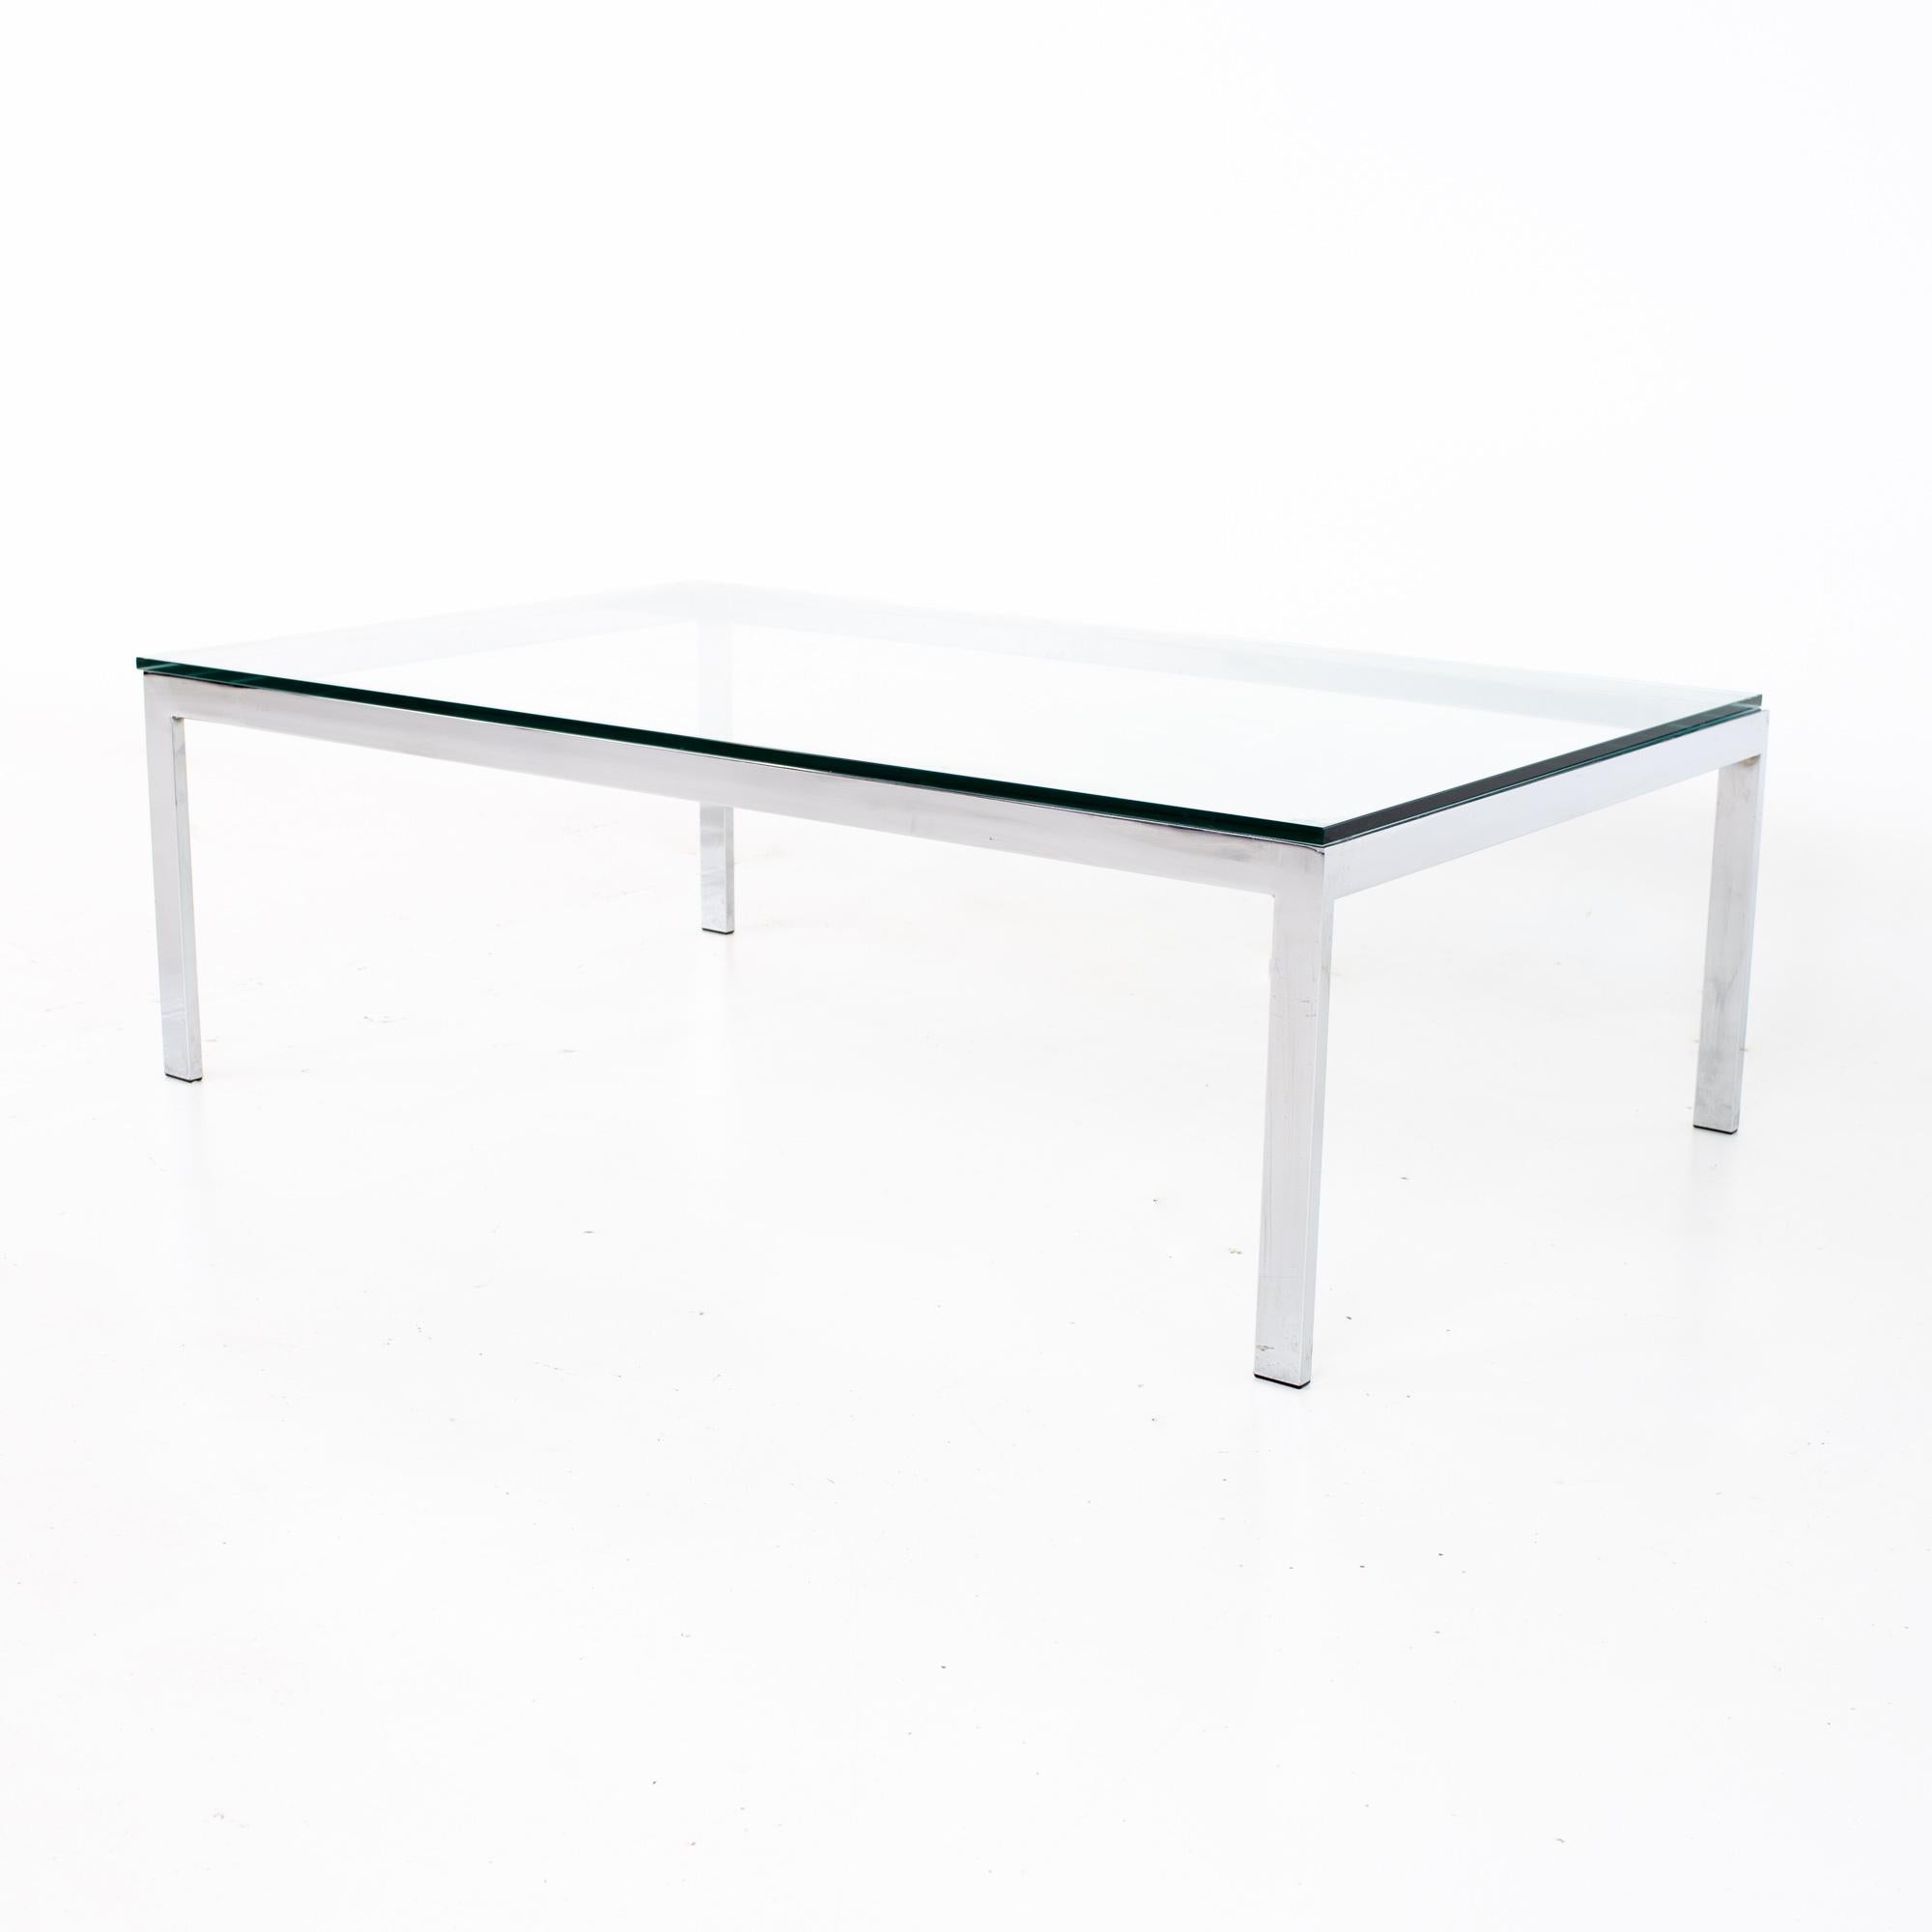 Knoll style mid century glass and chrome coffee table
Coffee table measures: 48 wide x 30 deep x 15 inches high

All pieces of furniture can be had in what we call restored vintage condition. That means the piece is restored upon purchase so it’s